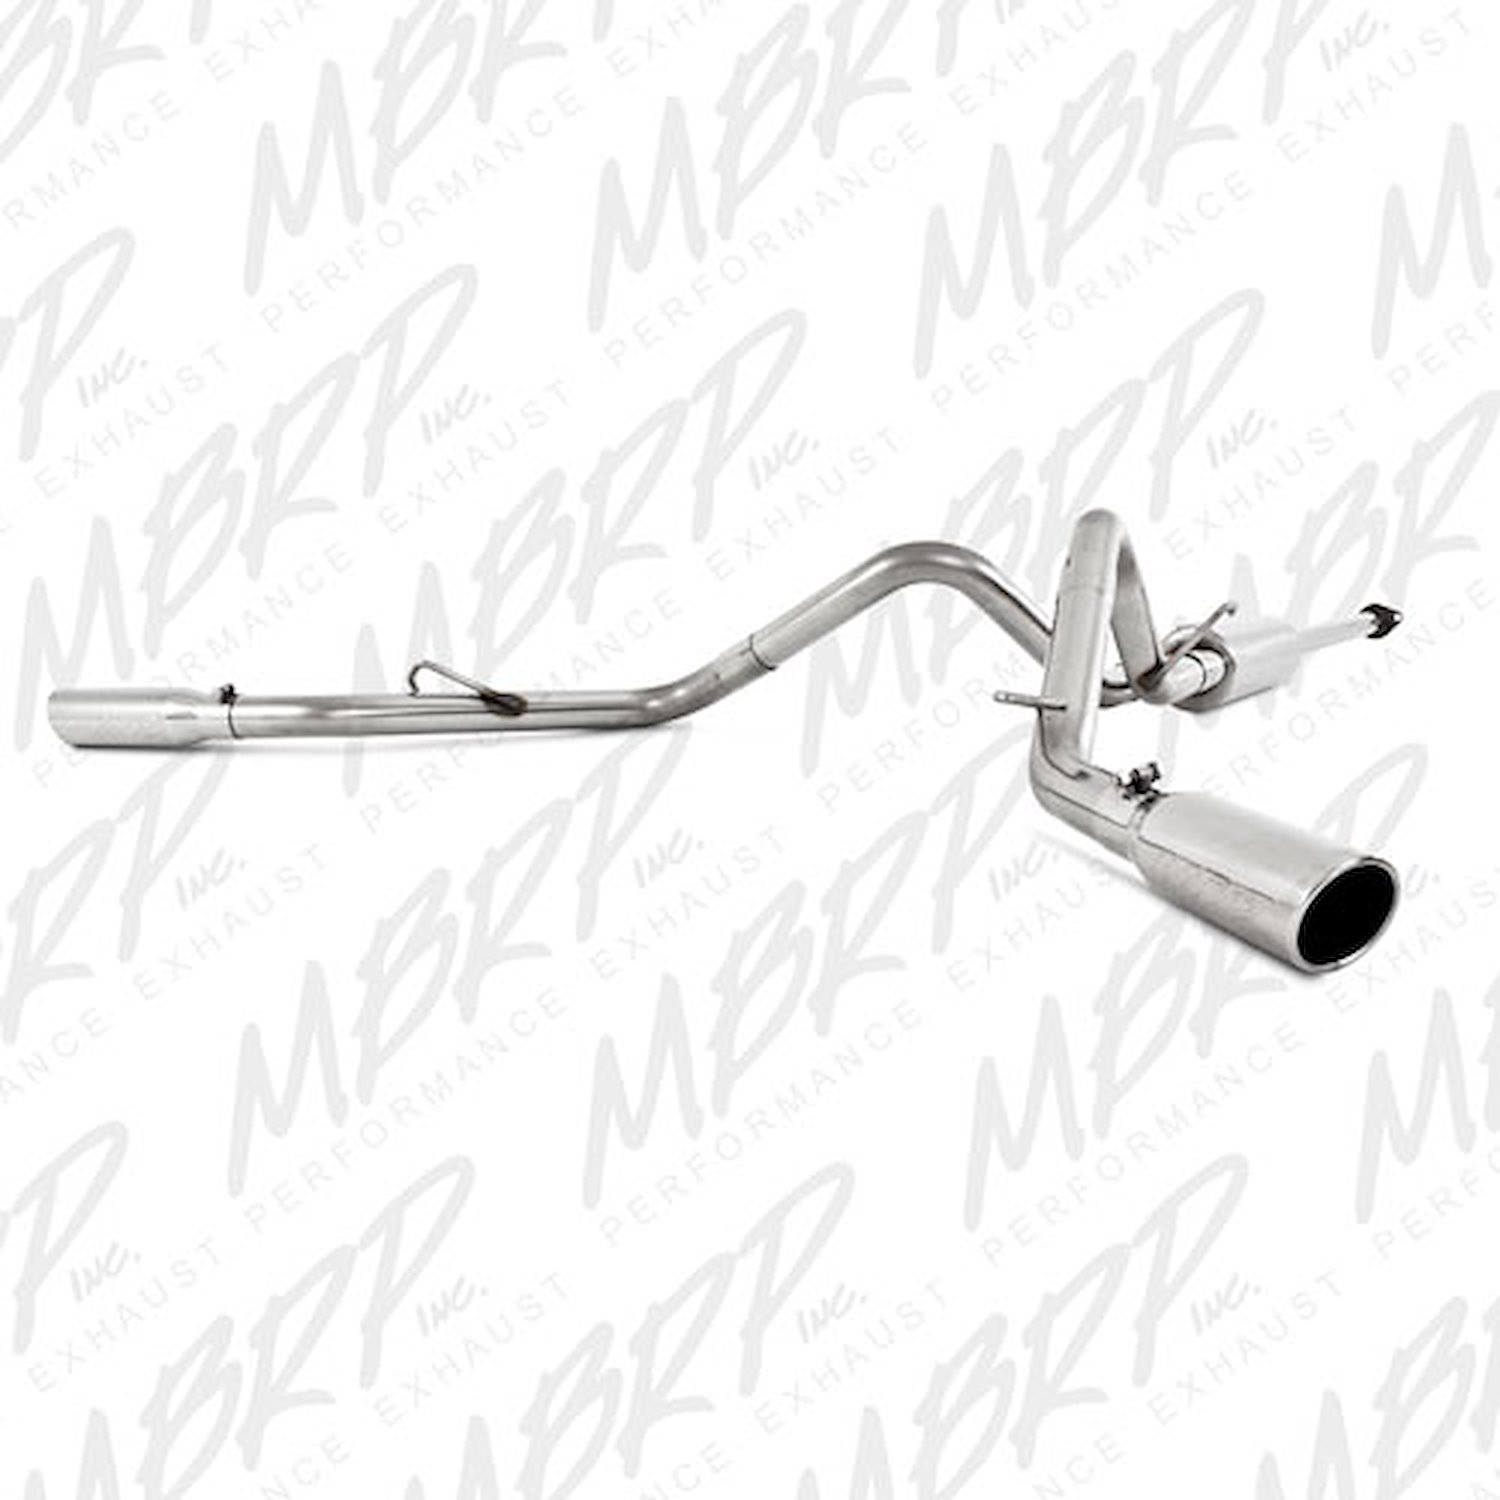 XP Series Exhaust System 2005-2015 Toyota Tacoma 4.0L